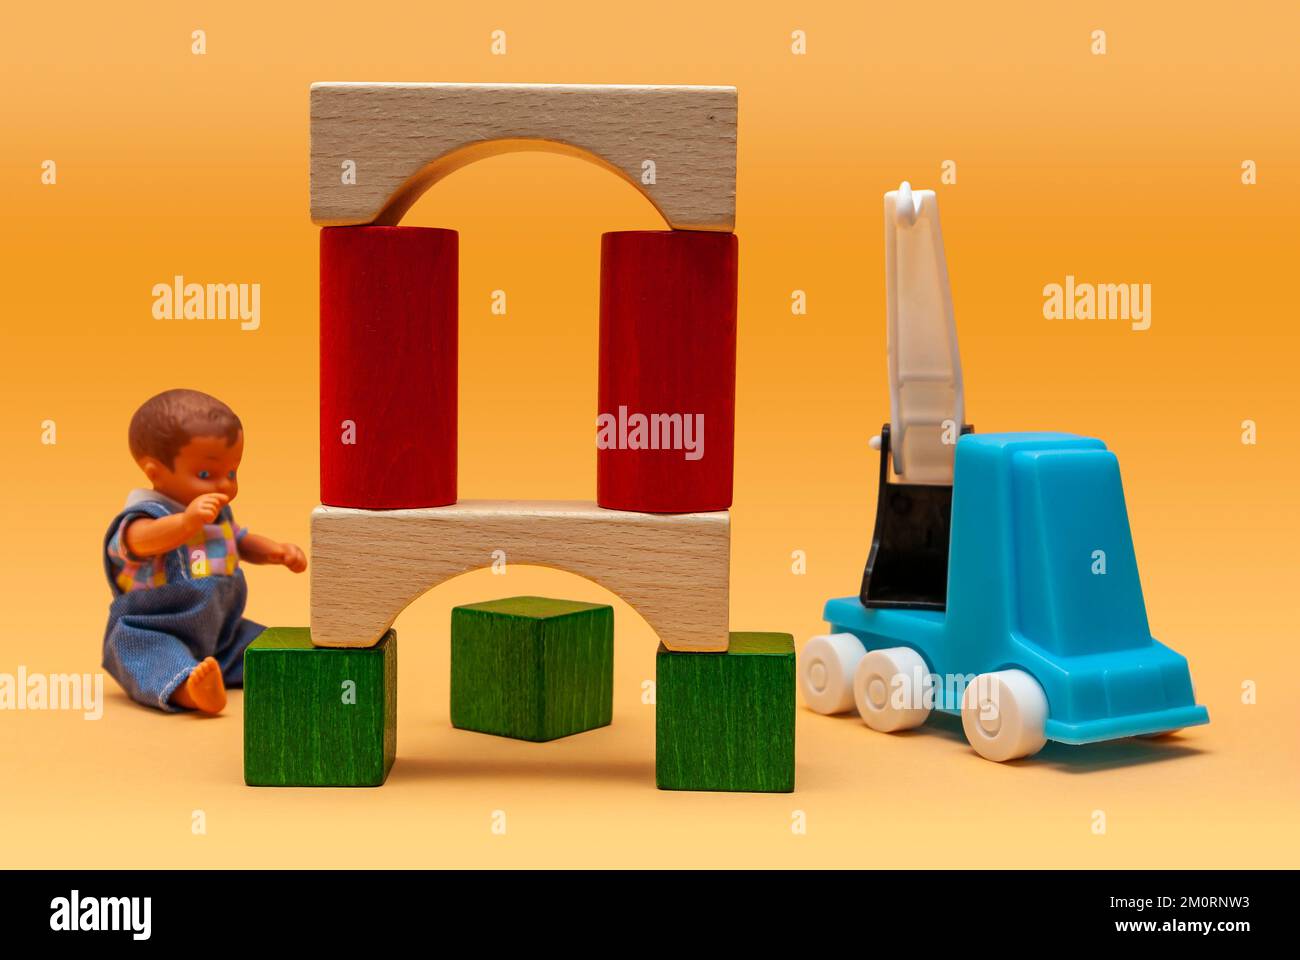 Construction of a viaduct by the means of a mobile crane and a boy doll, imitation of such a work site made of colourful building blocks. Stock Photo